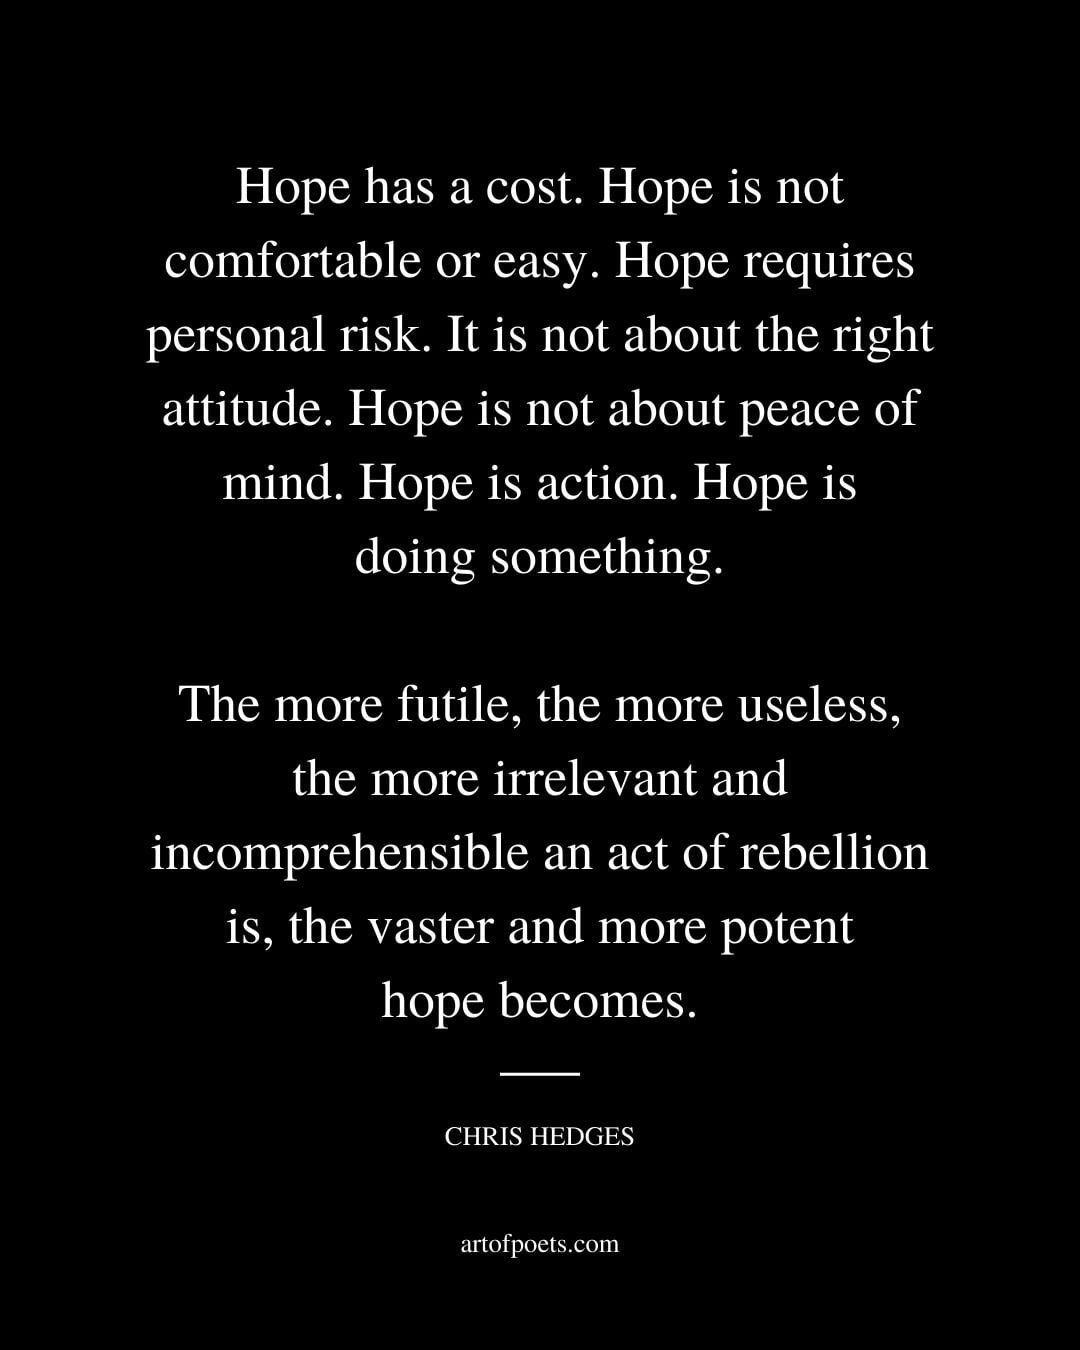 Hope has a cost. Hope is not comfortable or easy. Hope requires personal risk. It is not about the right attitude